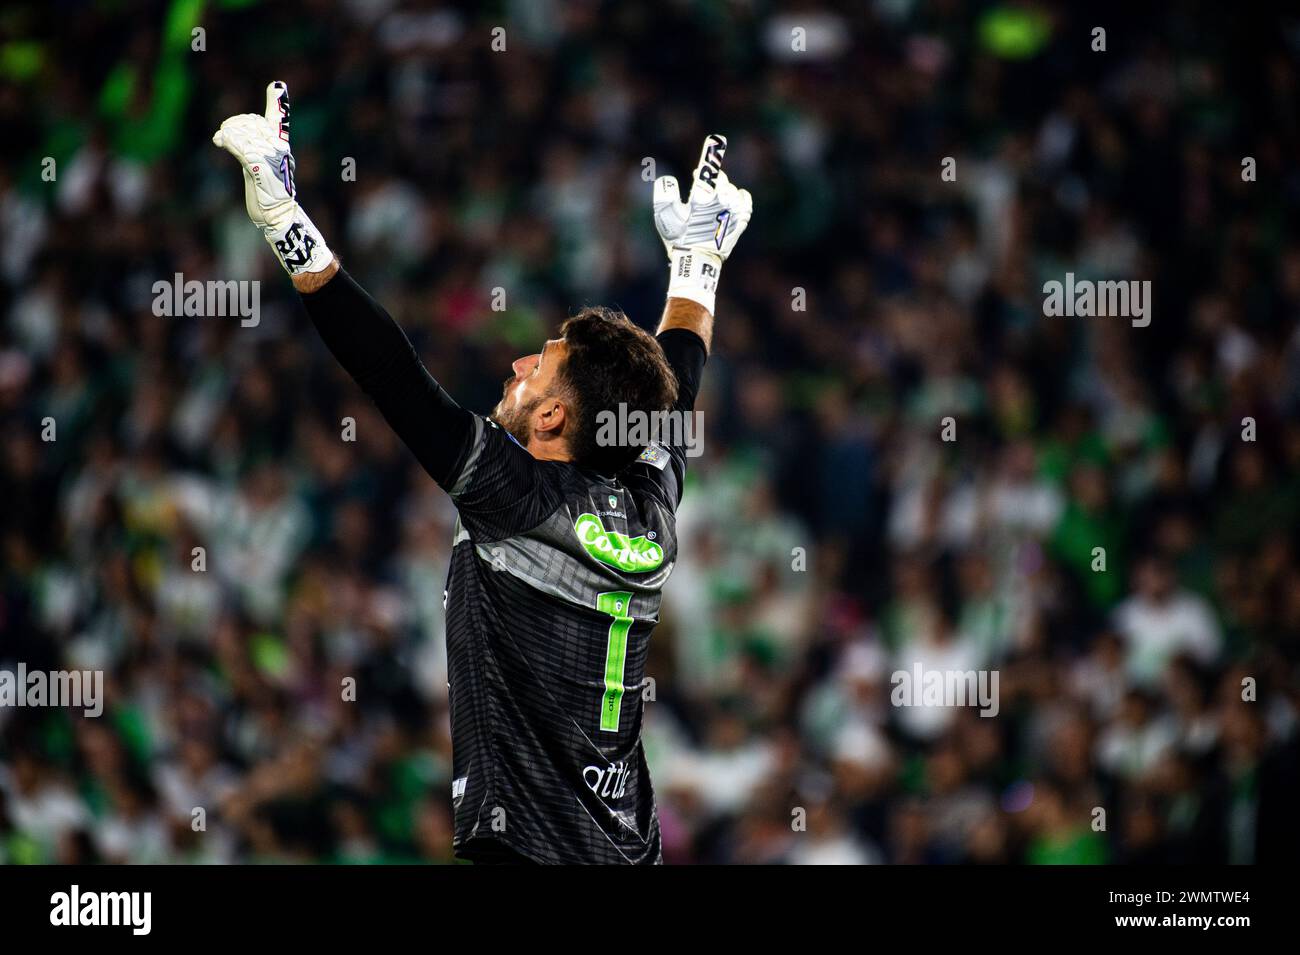 Bogota, Colombia. 25th Feb, 2024. Equidad's goalkeeper Washington Ortega reacts to a goal of Kevin Viveros during the BetPlay Dimayor Leagua match between Equidad (2) and Nacional (0) in Bogota, Colombia's El Campin stadium on February 25, 2024. Photo by: Sebastian Barros/Long Visual Press Credit: Long Visual Press/Alamy Live News Stock Photo